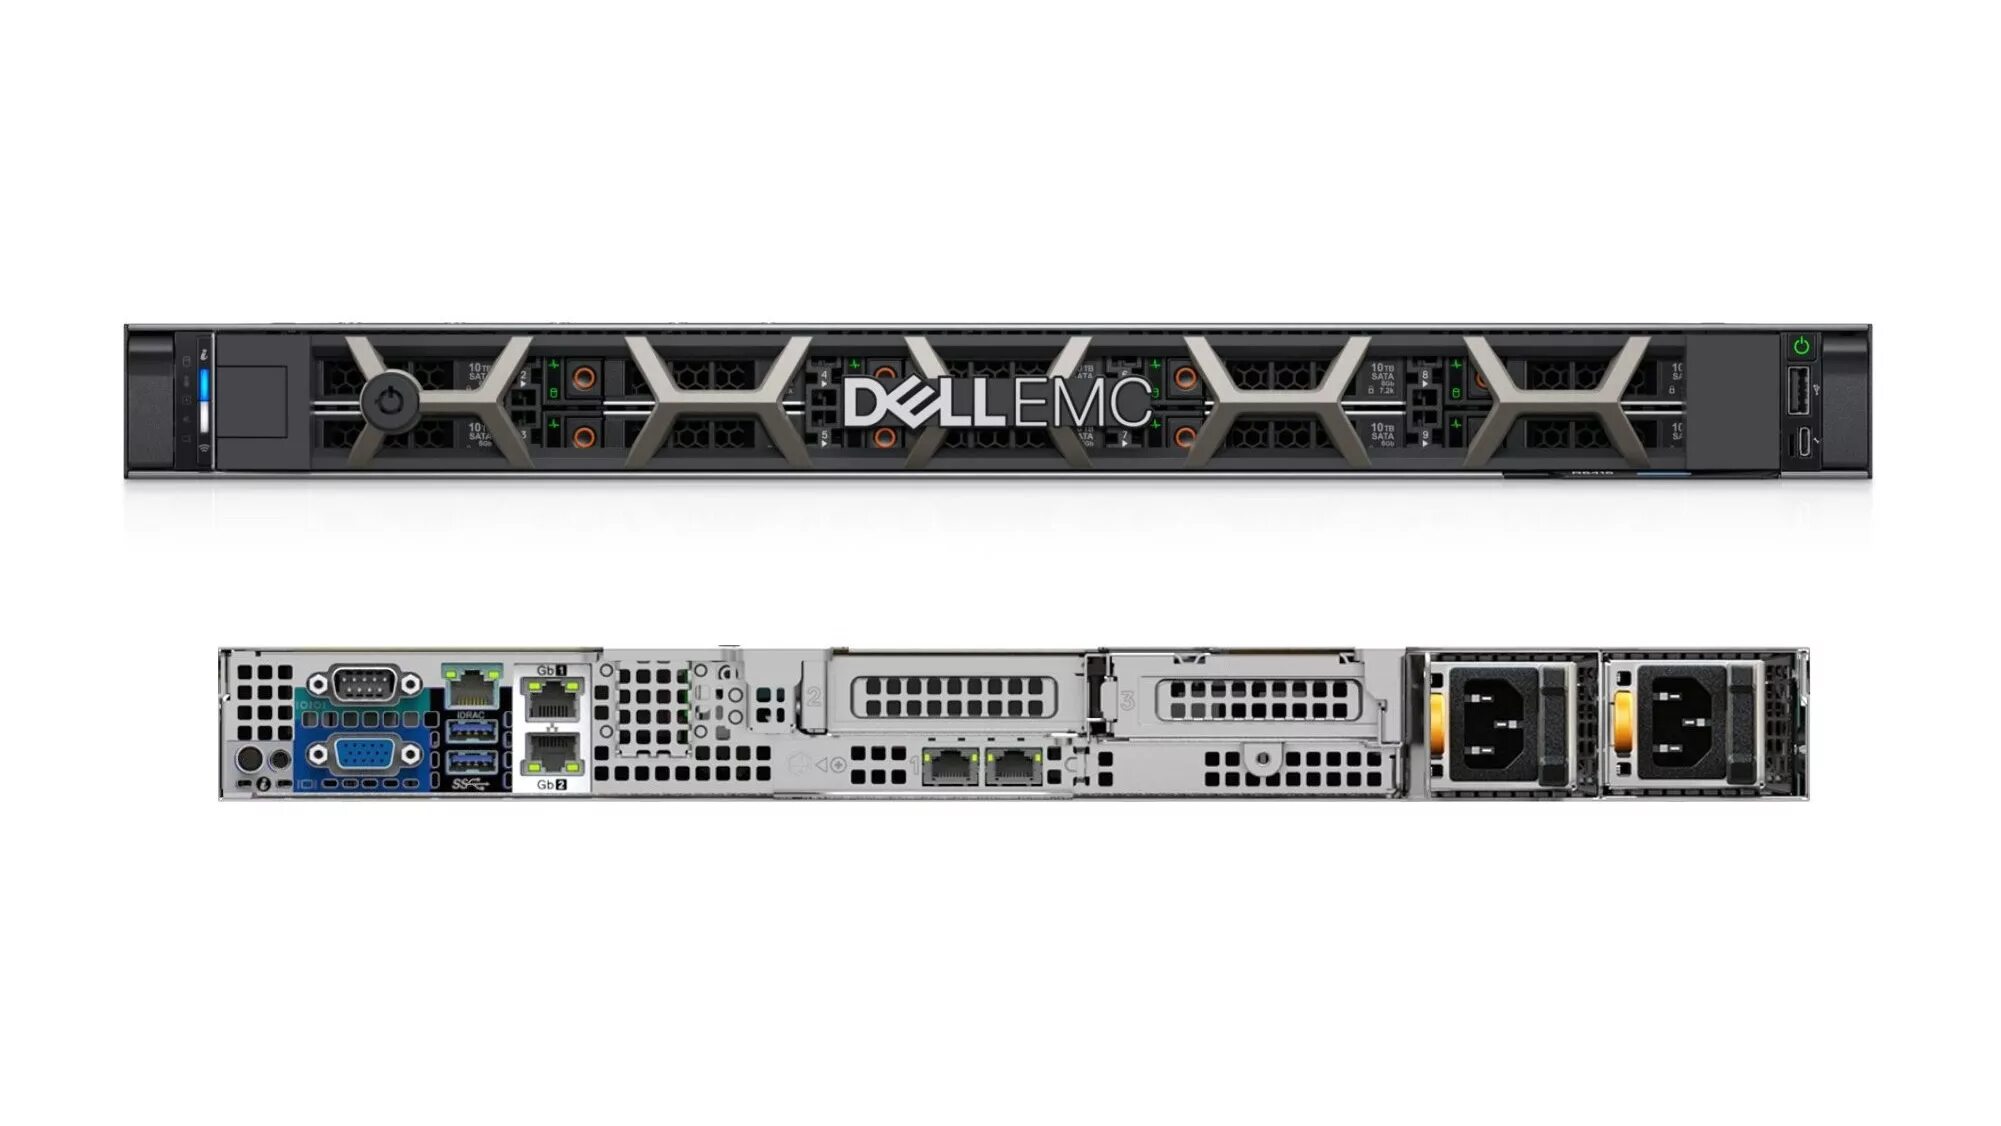 Dell EMC r640. Dell EMC POWEREDGE r640. Dell POWEREDGE r640 14g. Dell r640 NVME.